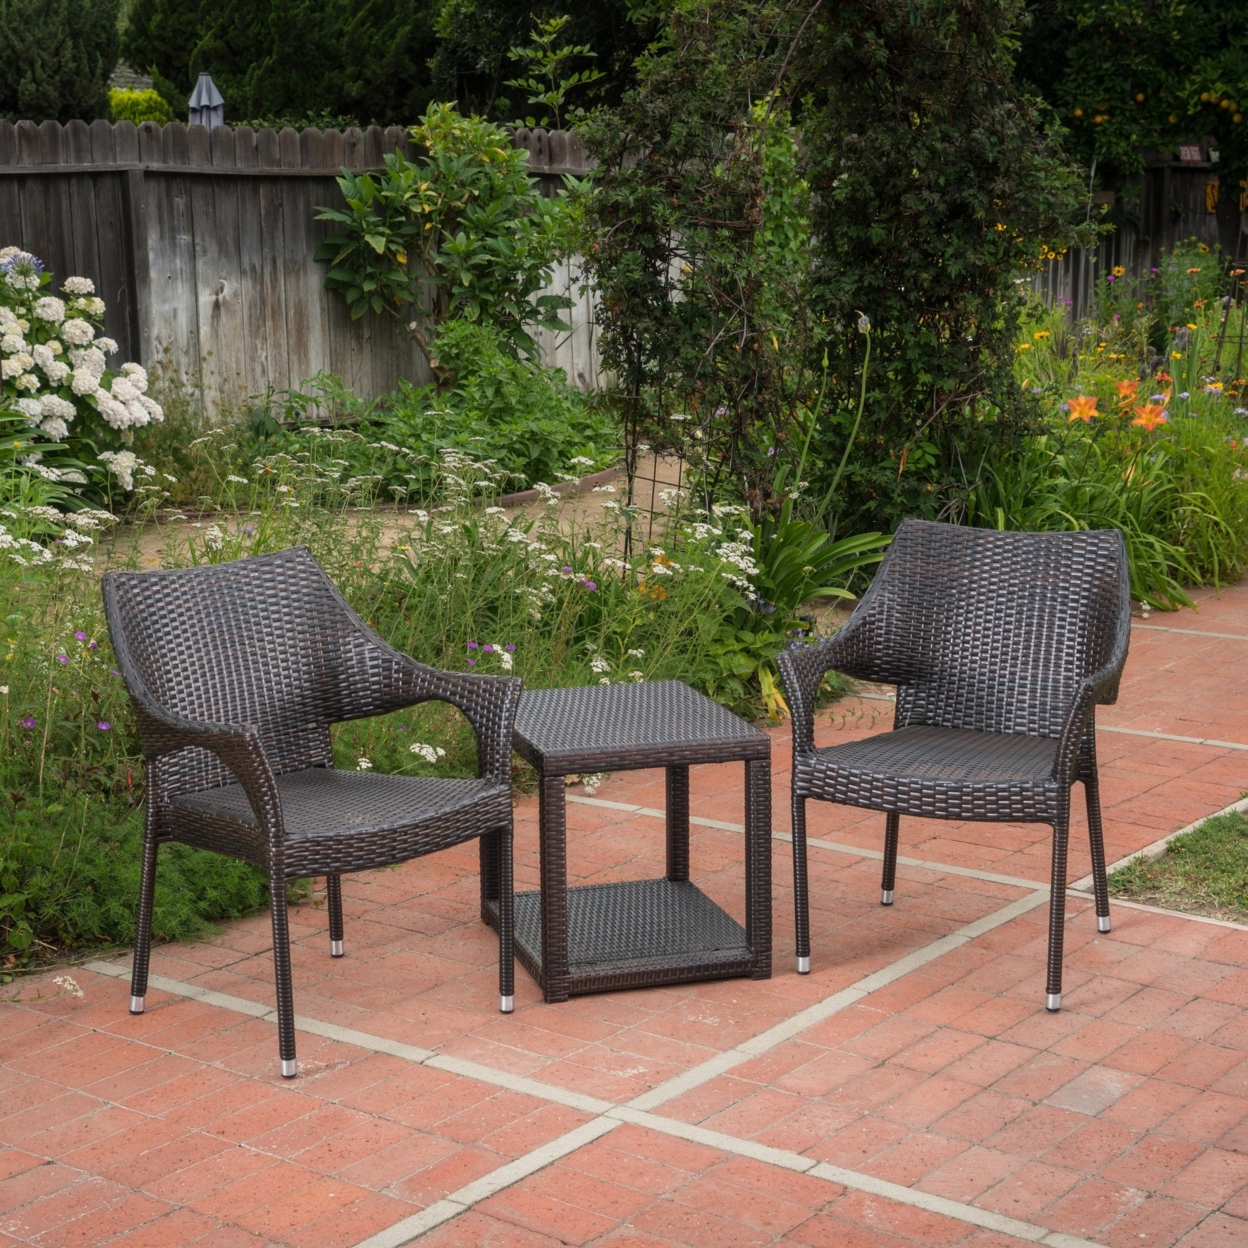 Alfheimr Outdoor 3 Piece Multi-brown Wicker Stacking Chair Chat Set - Box Table